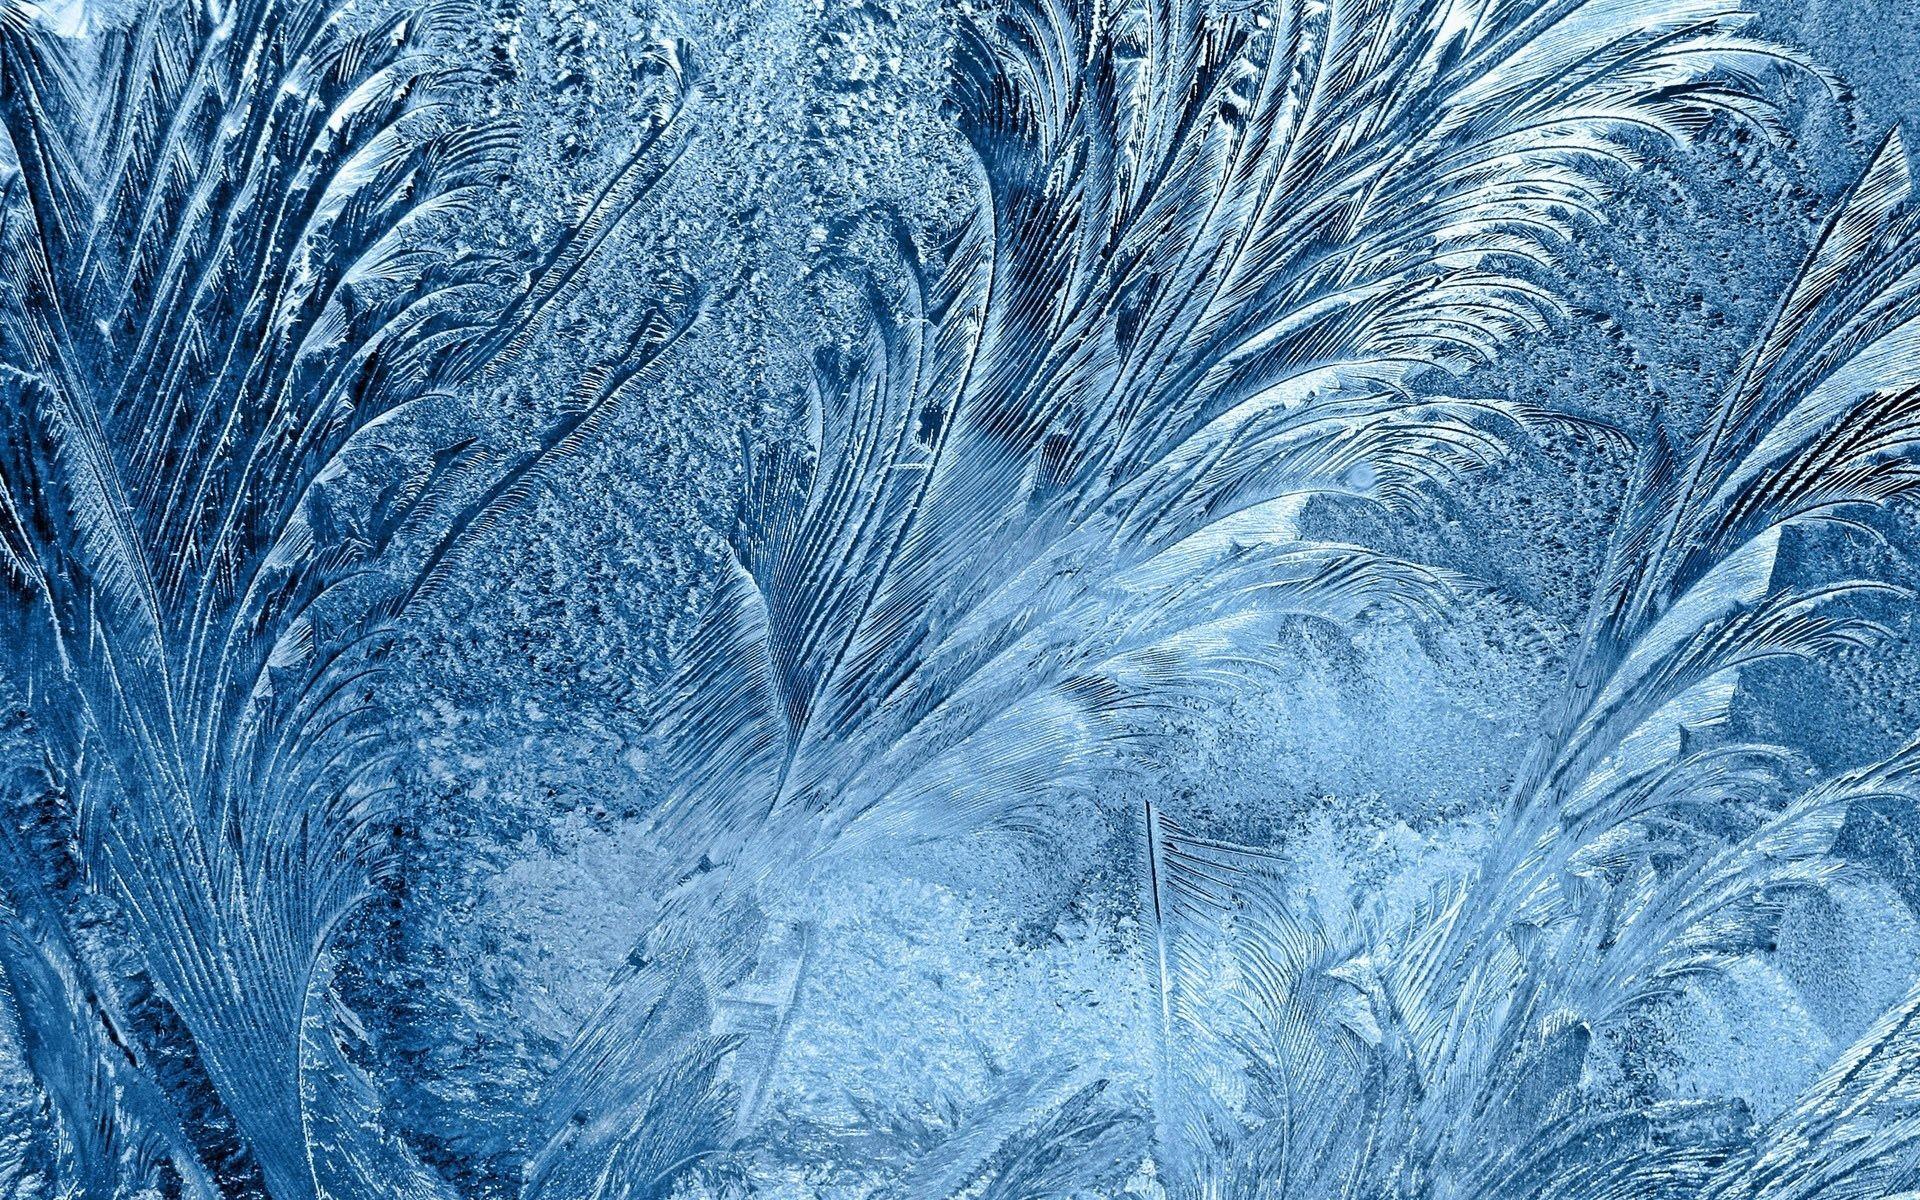 HQ 1920x1200 Resolution Awesome Ice